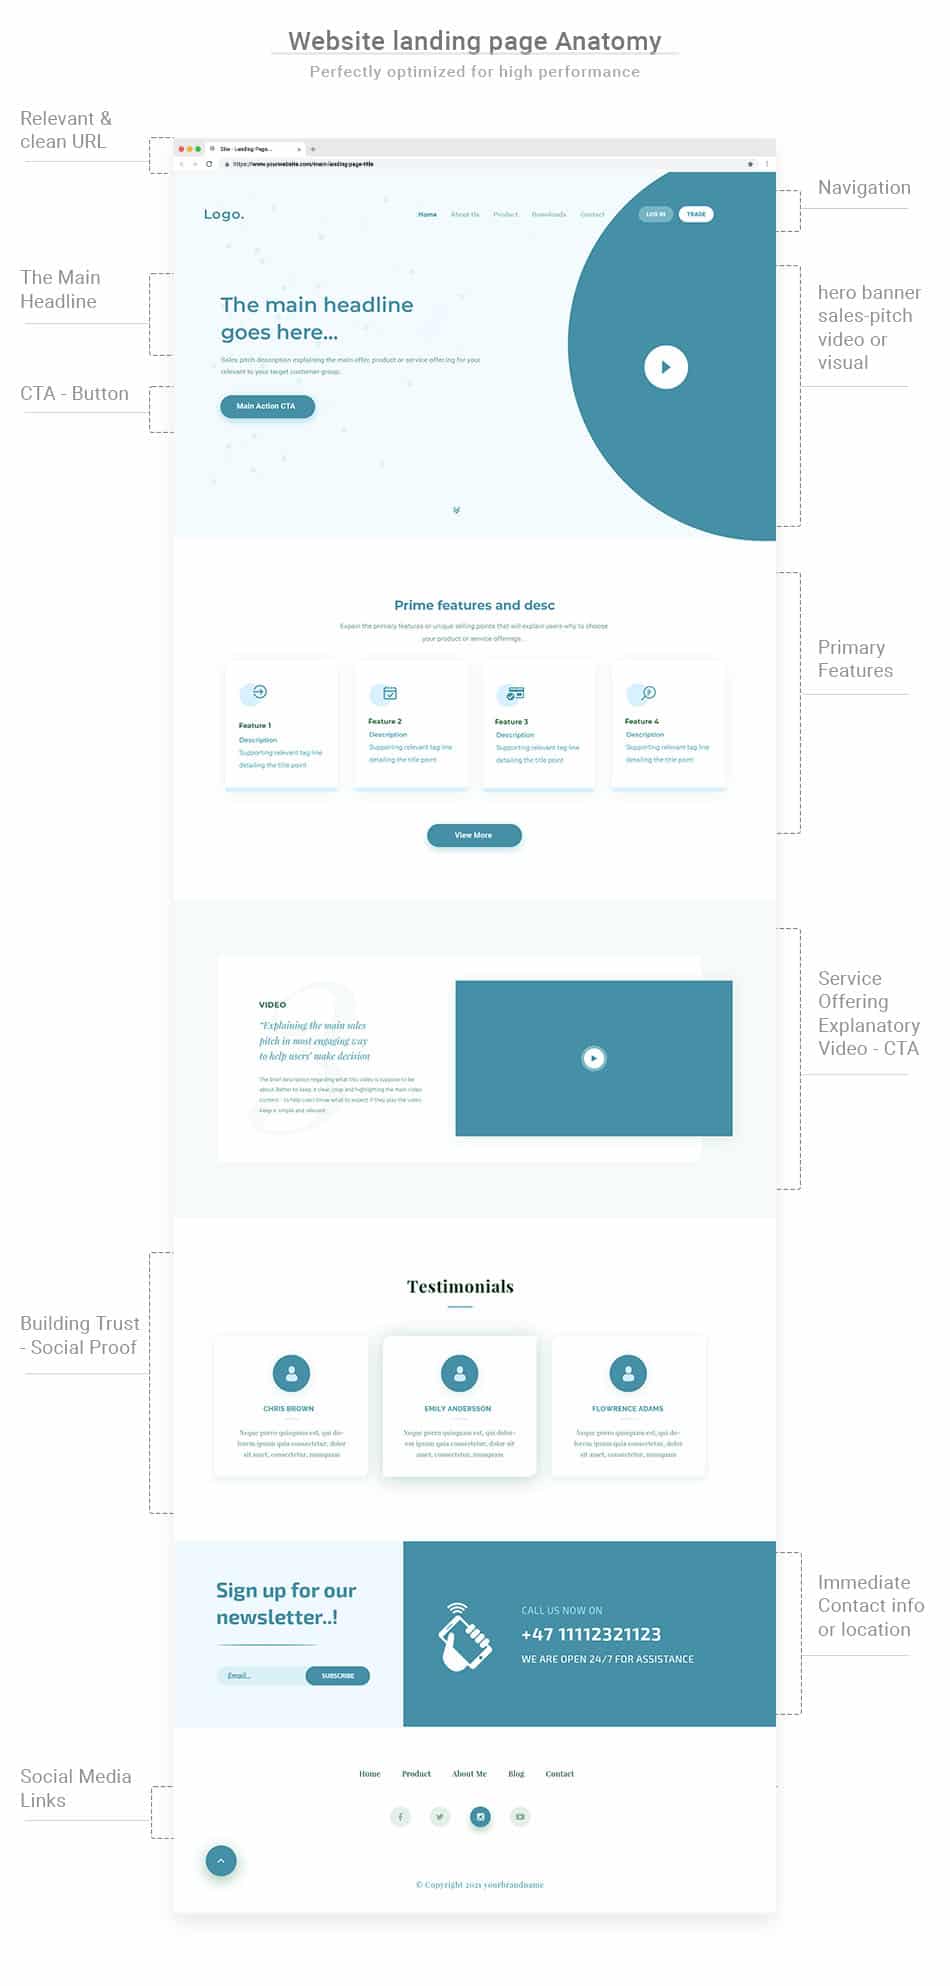 website landing page anatomy or structure